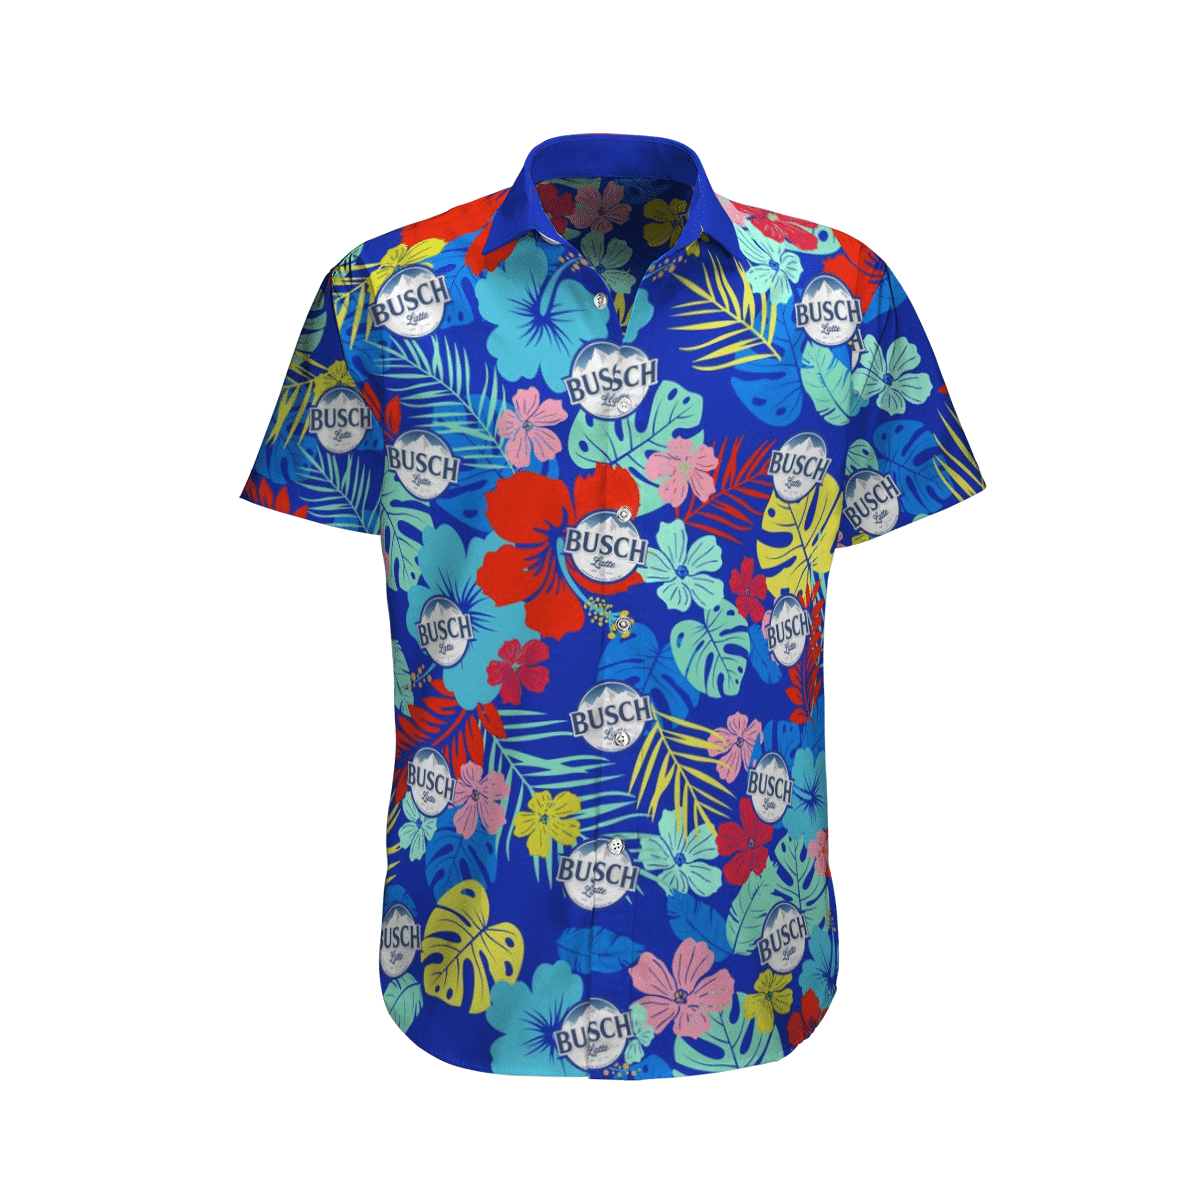 Top cool Hawaiian shirt 2022 - Make sure you get yours today before they run out! 16